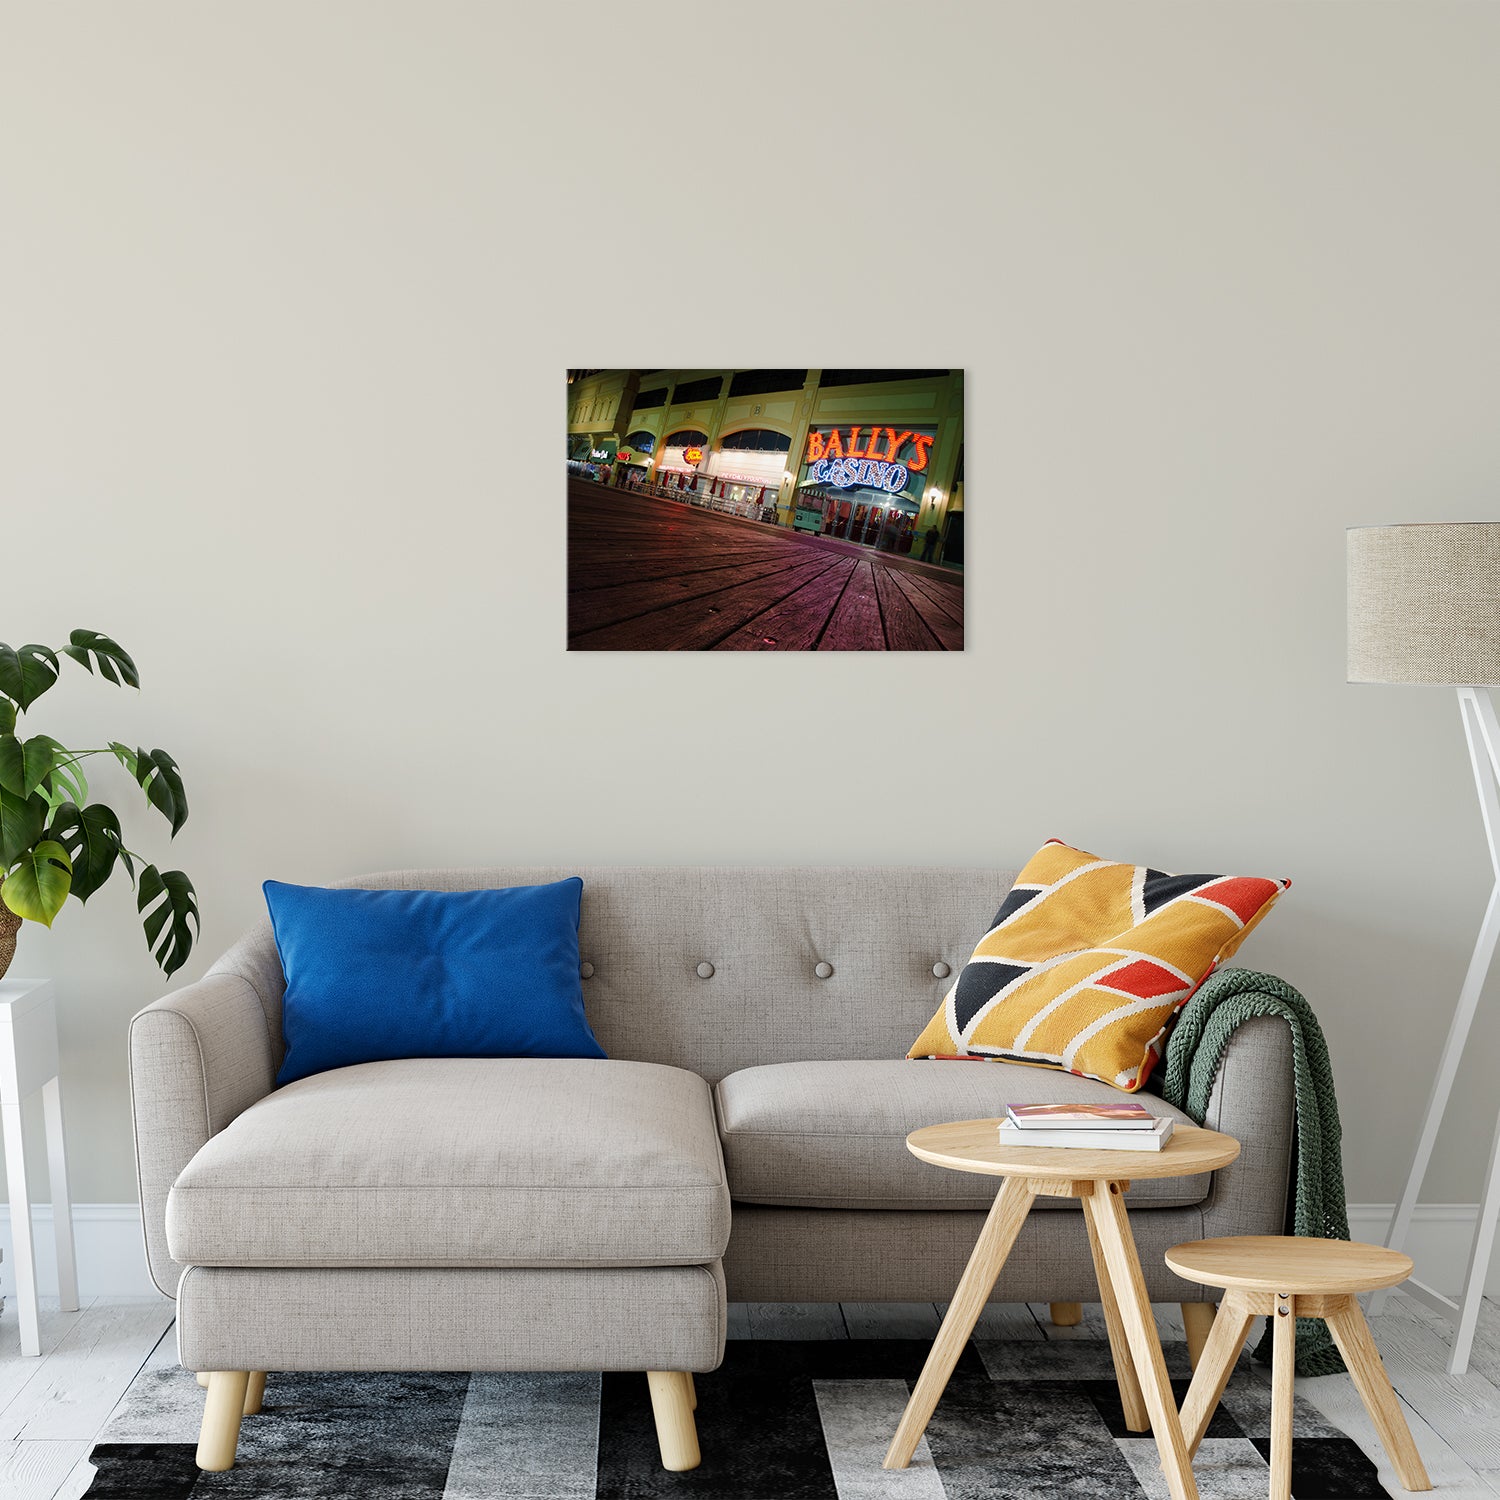 Low on the Boards Night Photo Fine Art Canvas Wall Art Prints 20" x 30" - PIPAFINEART